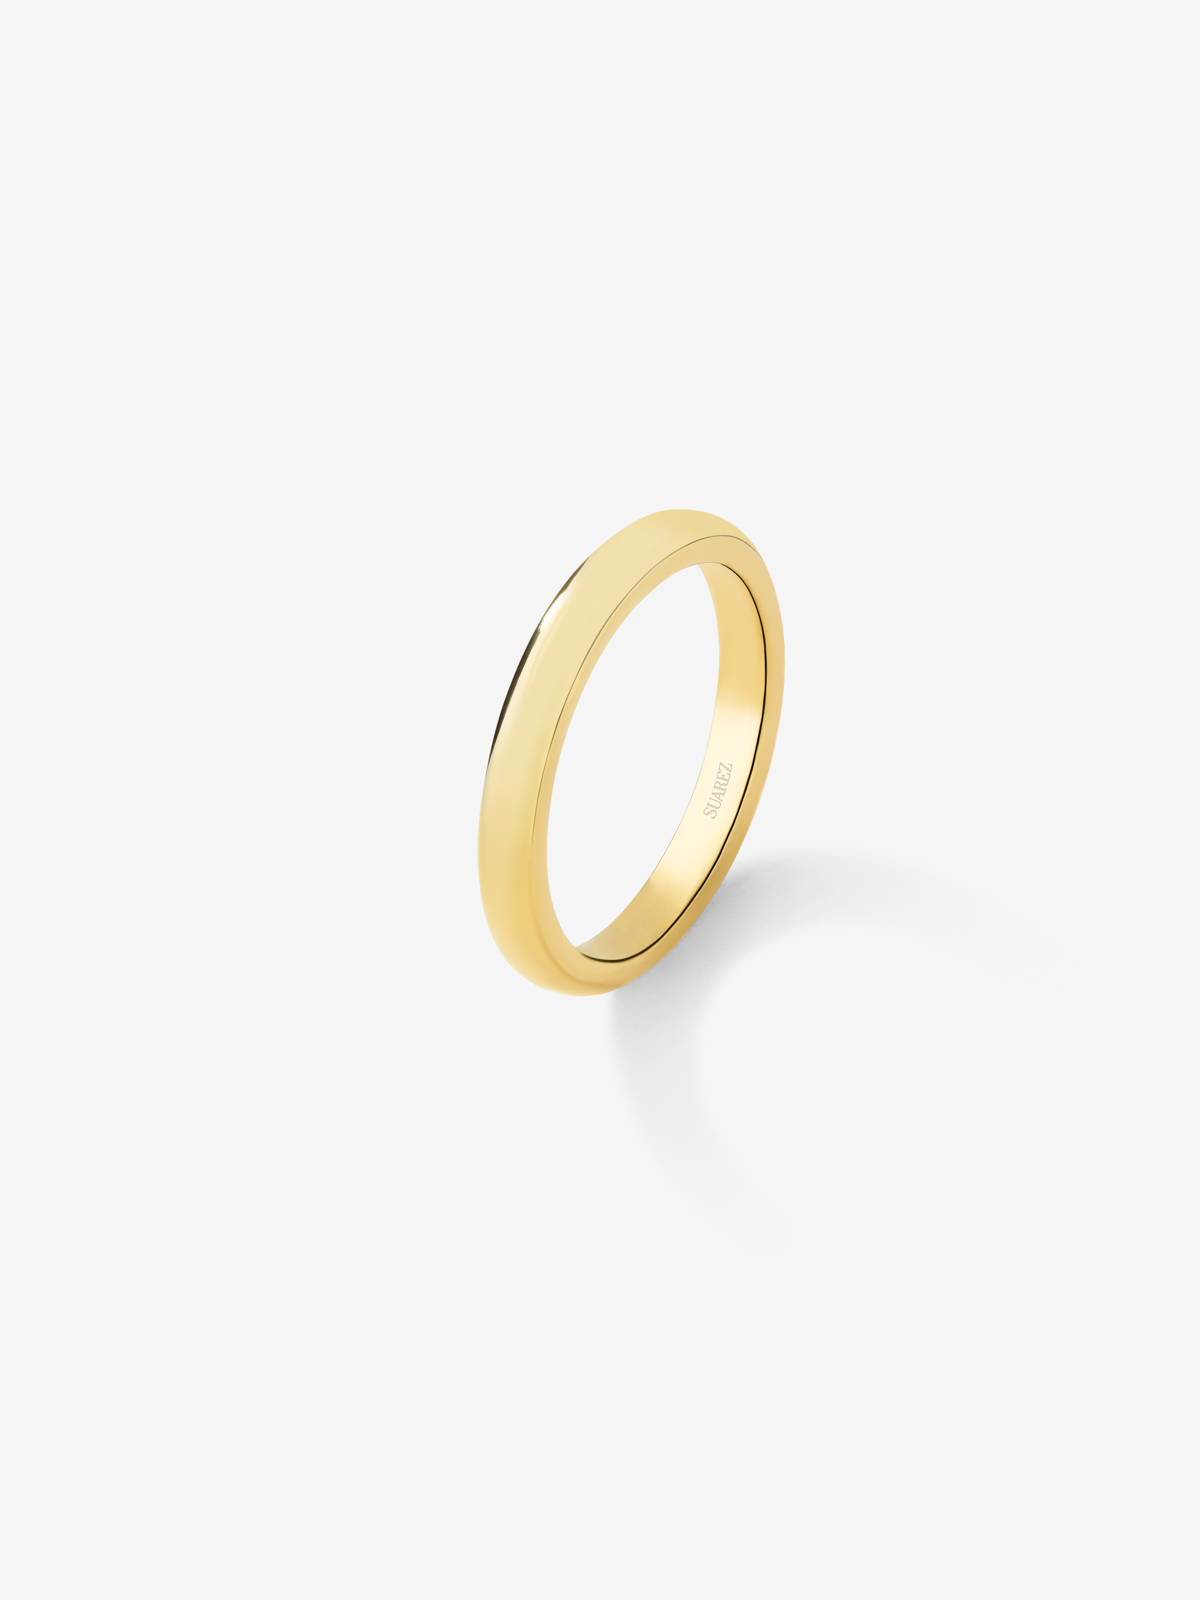 18K 1.9mm yellow flat compromise ring